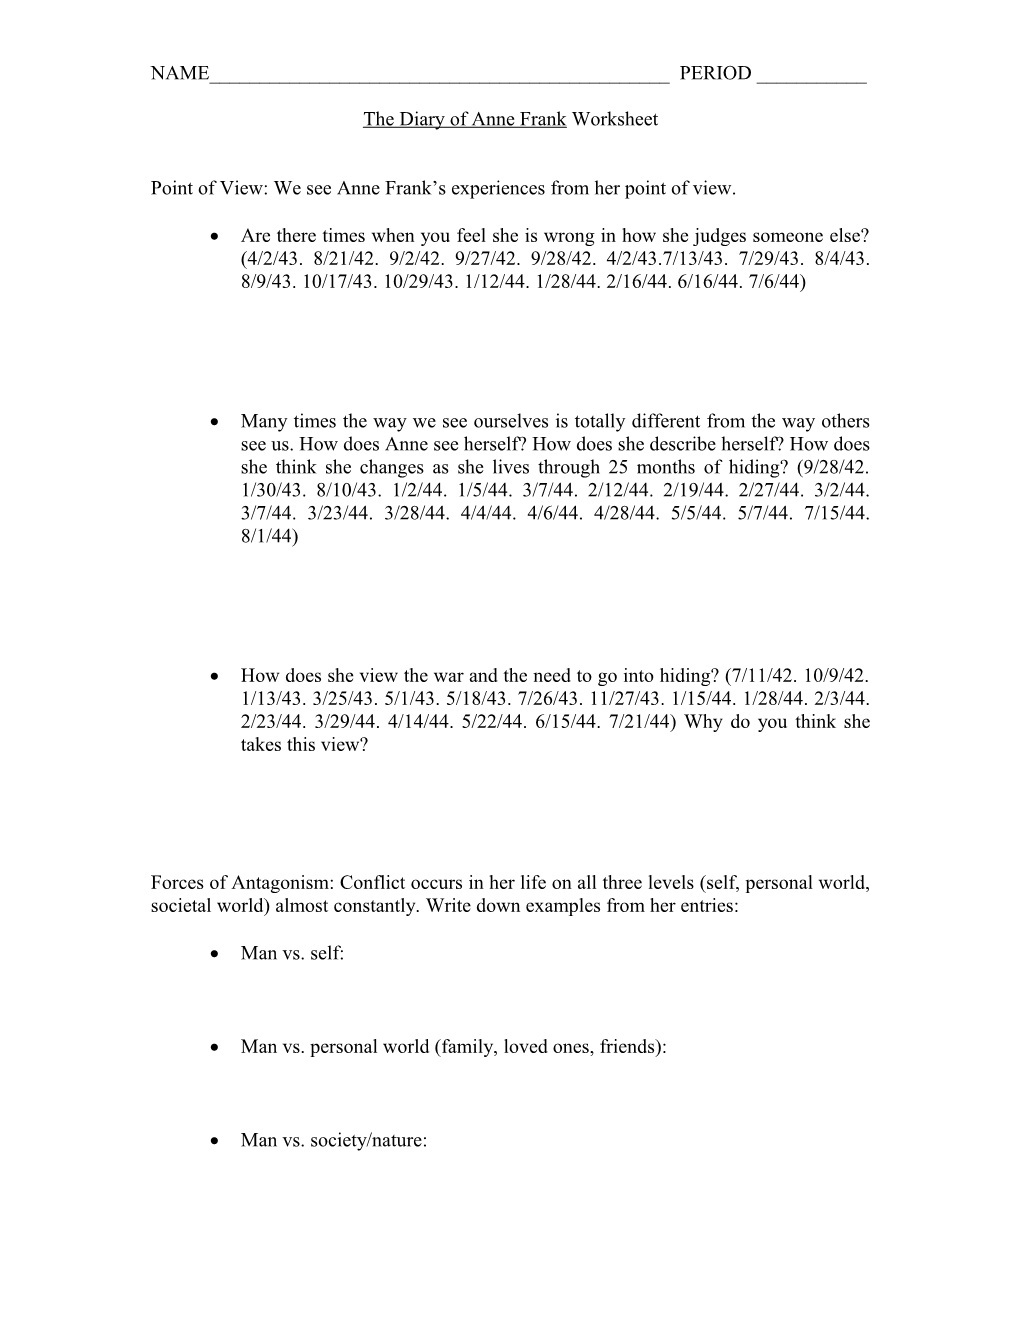 The Diary of Anne Frank Worksheet